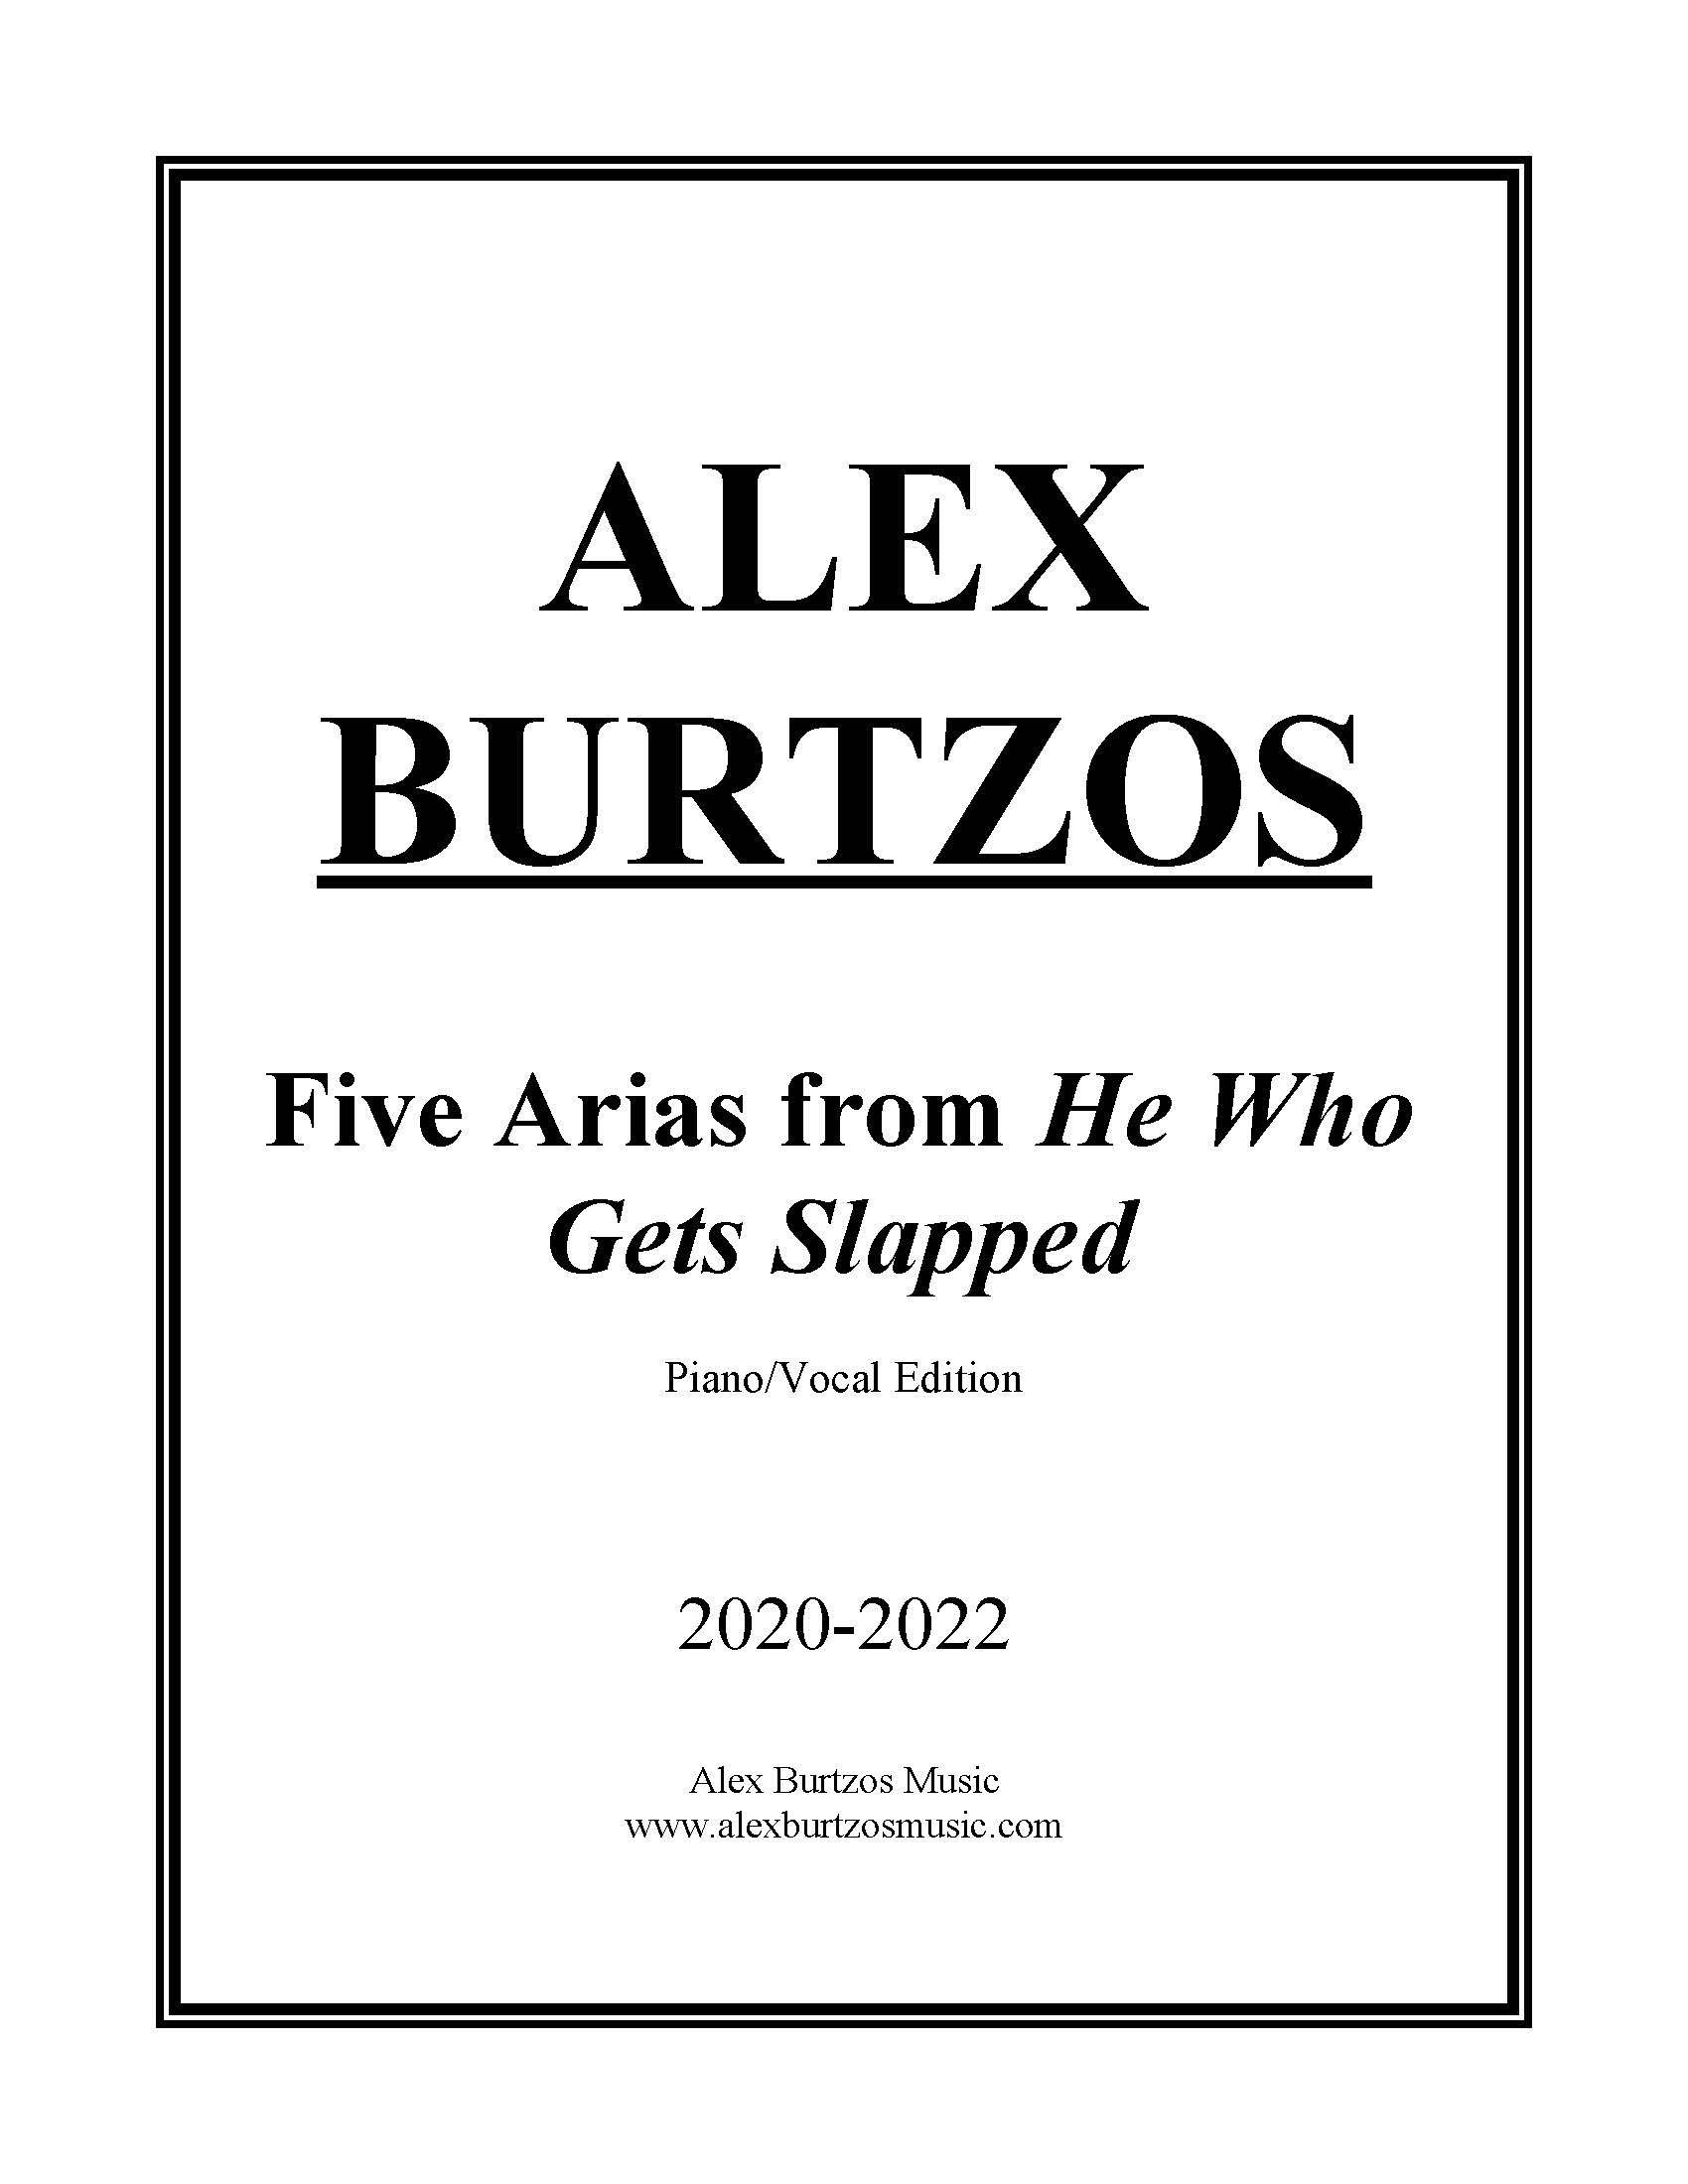 Five Arias from HWGS - Complete Score (1)_Page_01.jpg